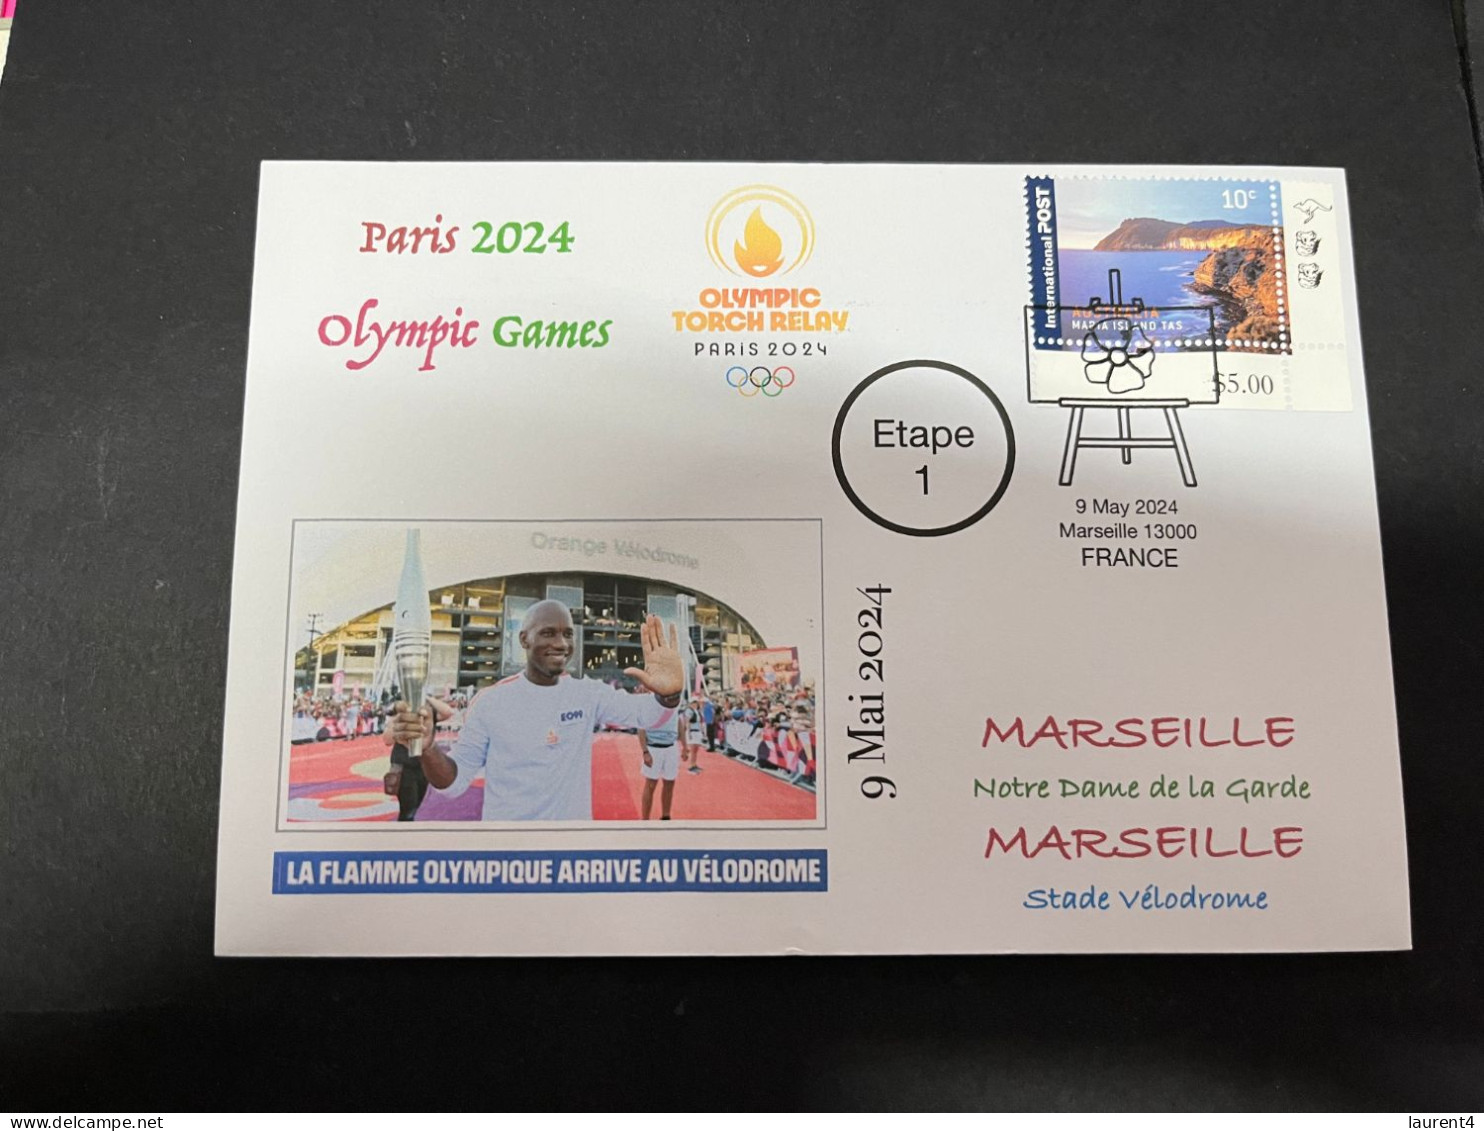 10-5-2024 (4 Z 37) Paris Olympic Games 2024 - Torch Relay (Etape 1) In Marseille (9-5-2024) With OZ Stamp - Summer 2024: Paris